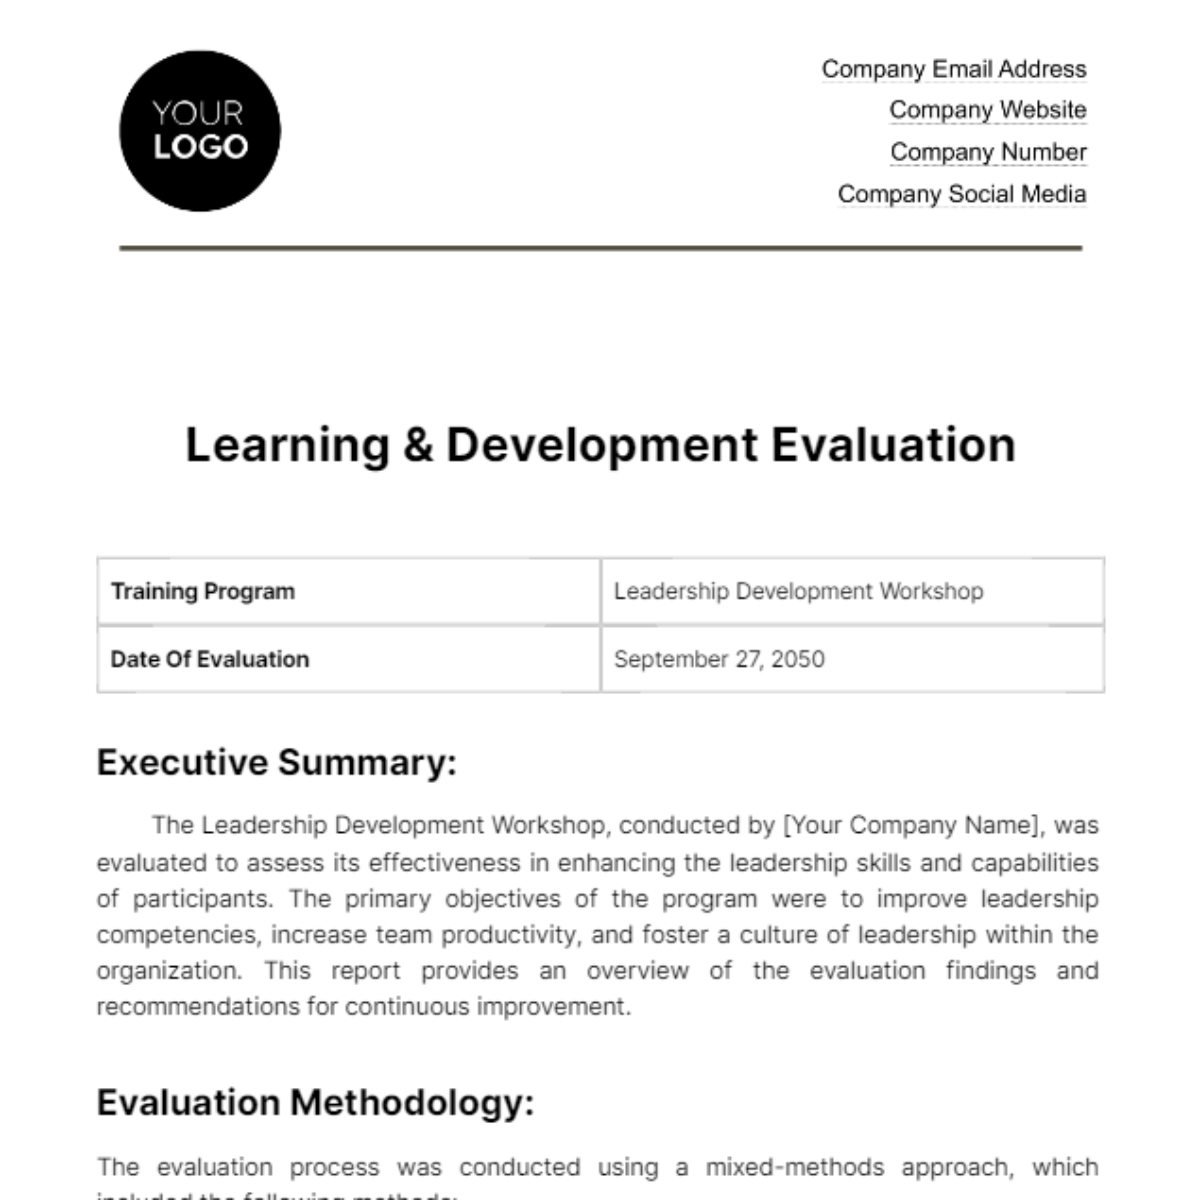 Learning & Development Evaluation HR Template